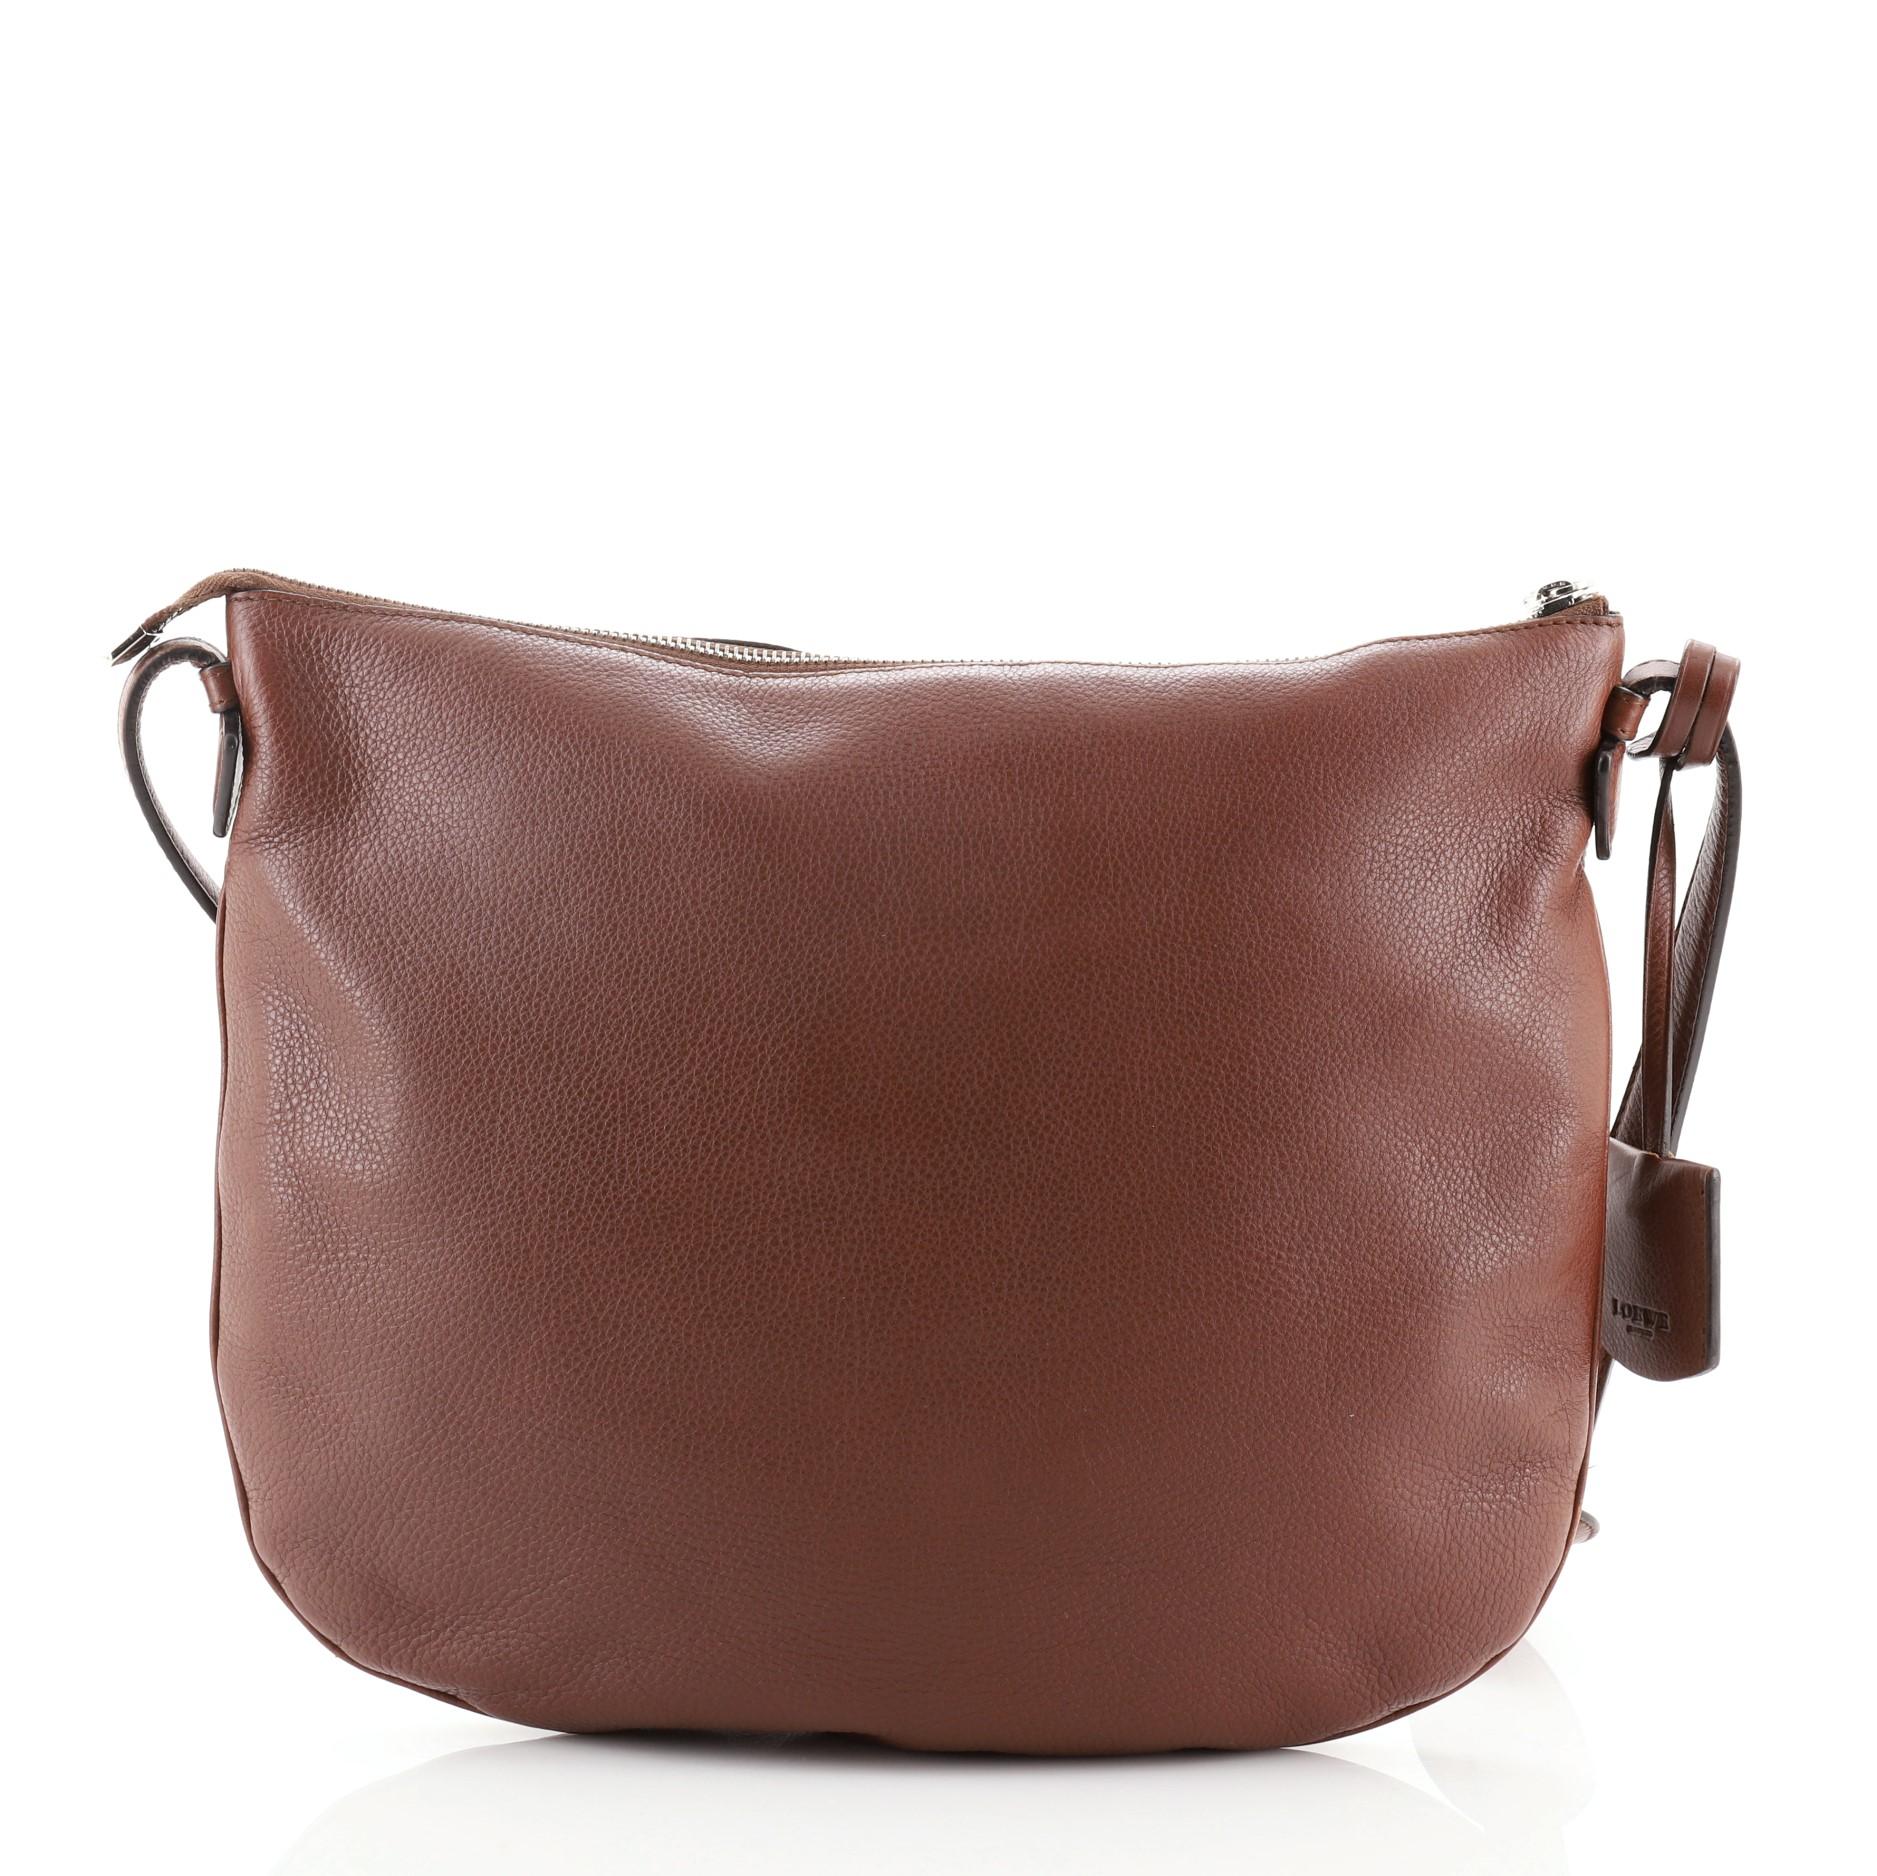 Loewe Heritage Messenger Leather
Brown

Condition Details: Wear and scuffs on exterior and exterior edges, small mark on front. Cracking and peeling on strap wax edges near base, scratches on hardware.

51945MSC

Height 11.5